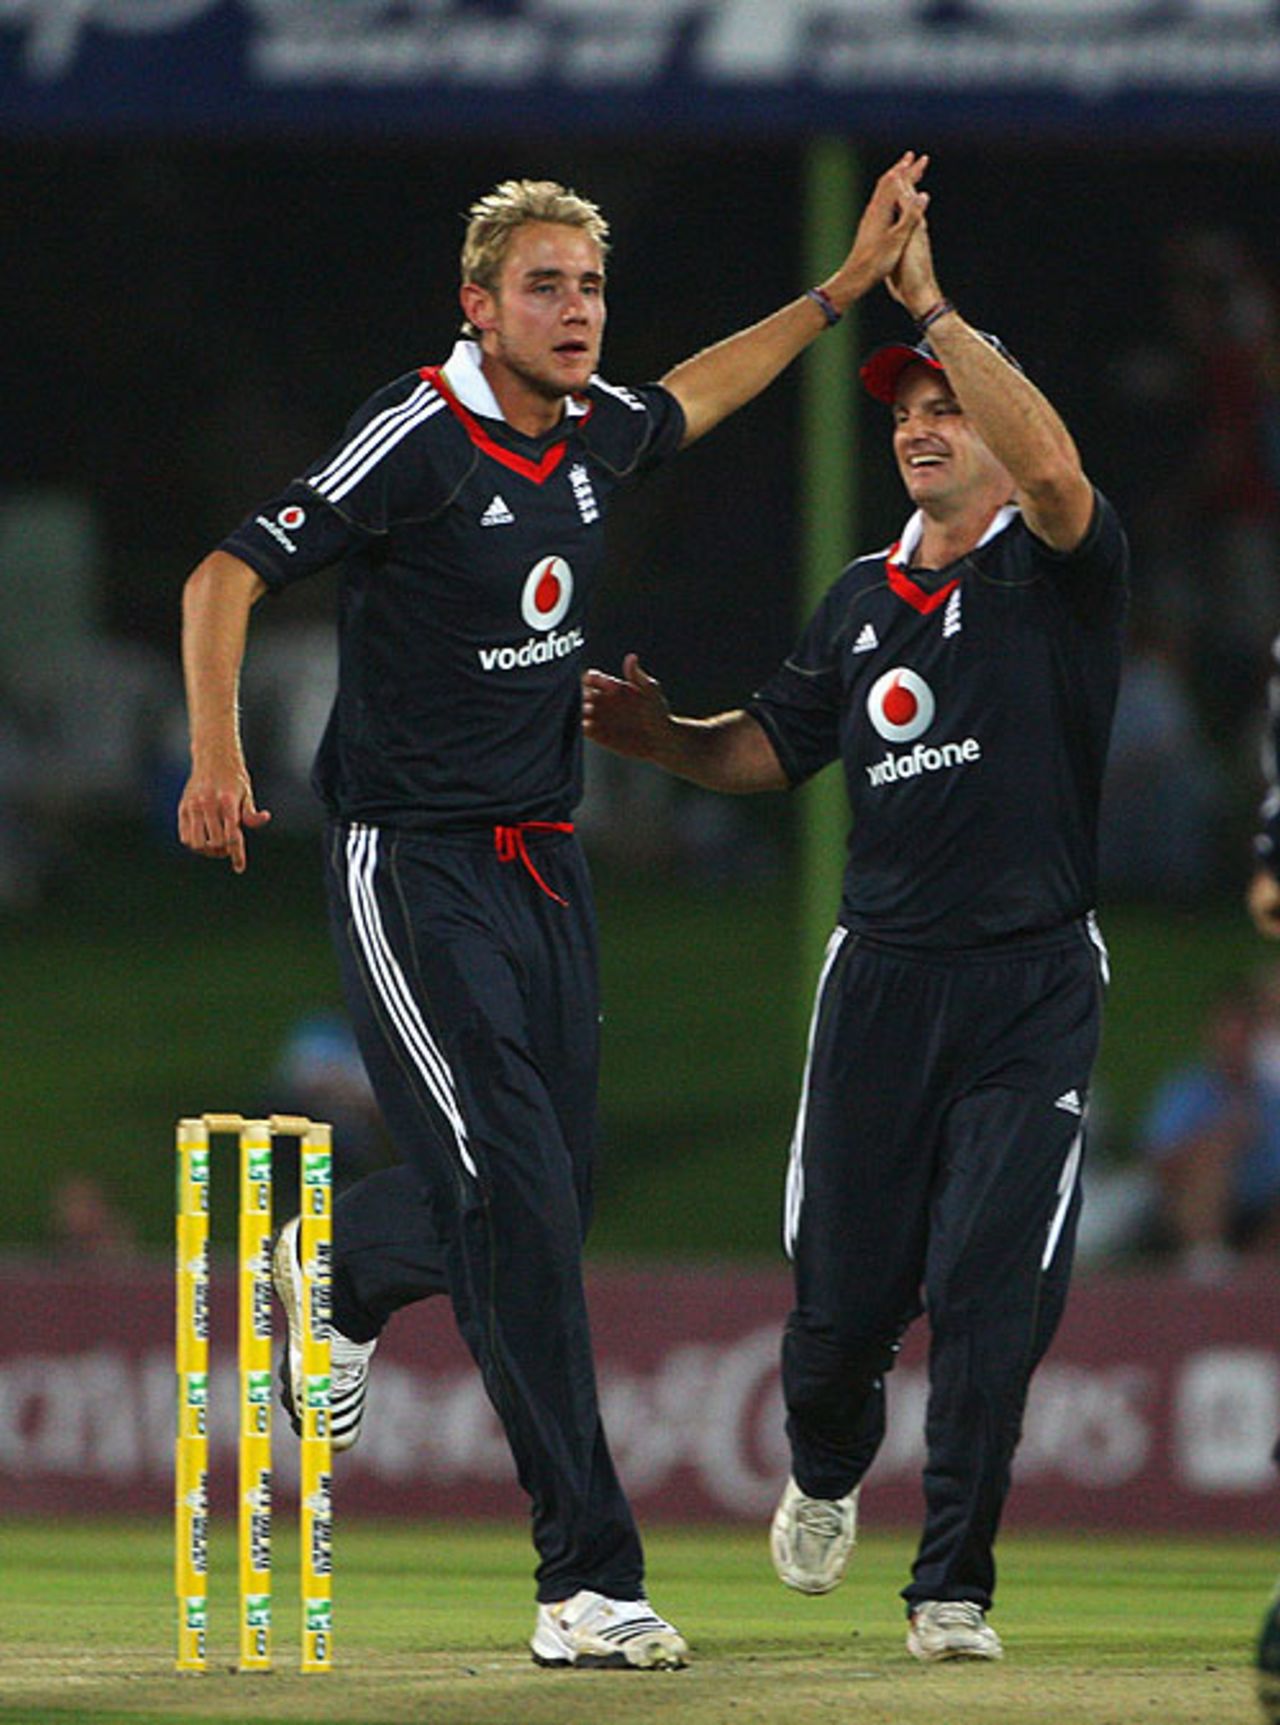 Stuart Broad struck in each of his first two overs to rattle the Eagles, Eagles v England XI, Bloemfontein, November 6, 2009